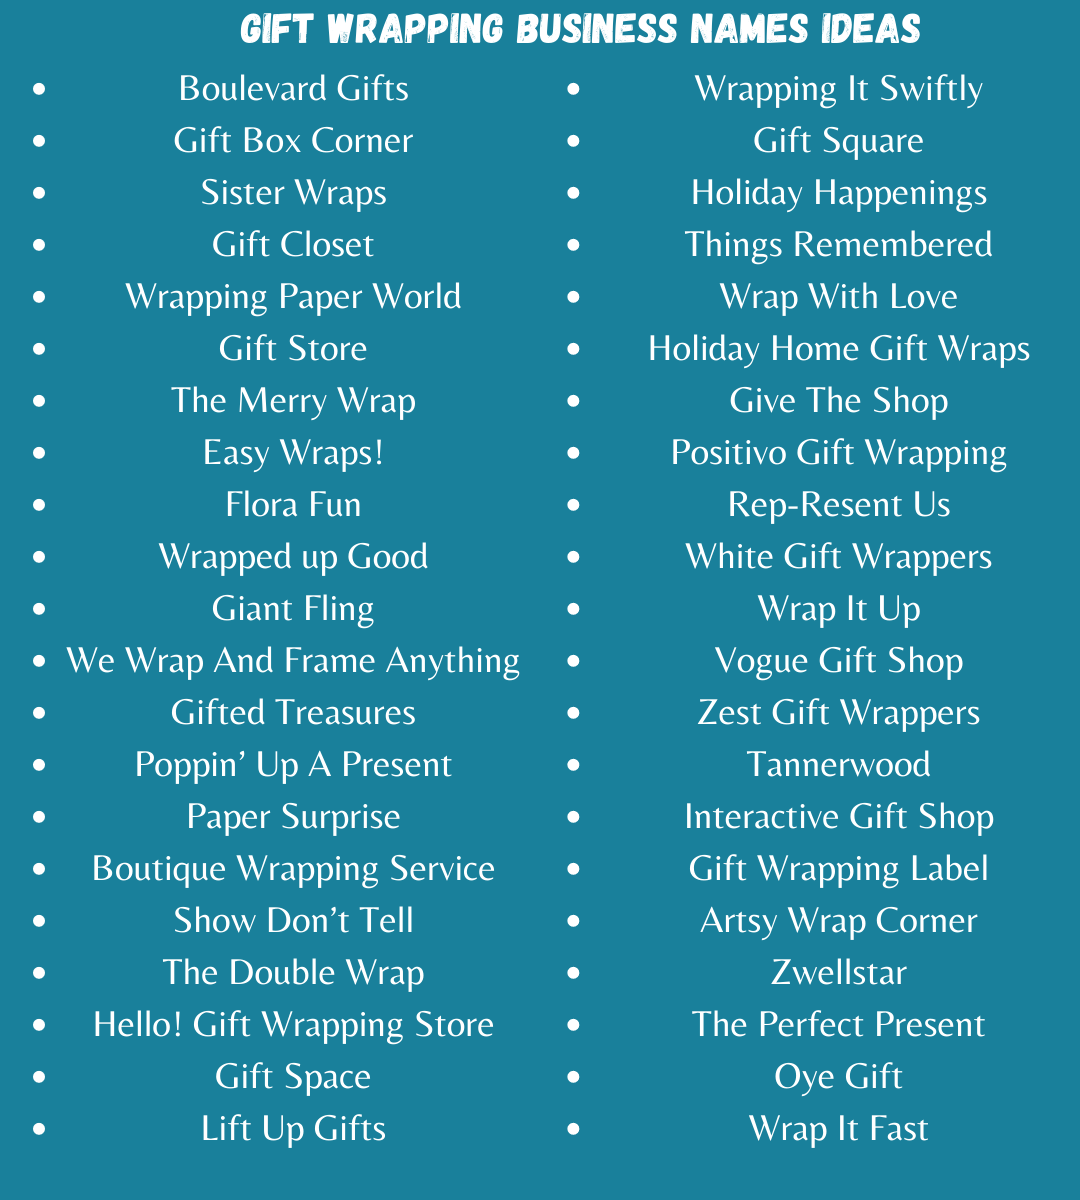 Gift Wrapping Business Names Ideas